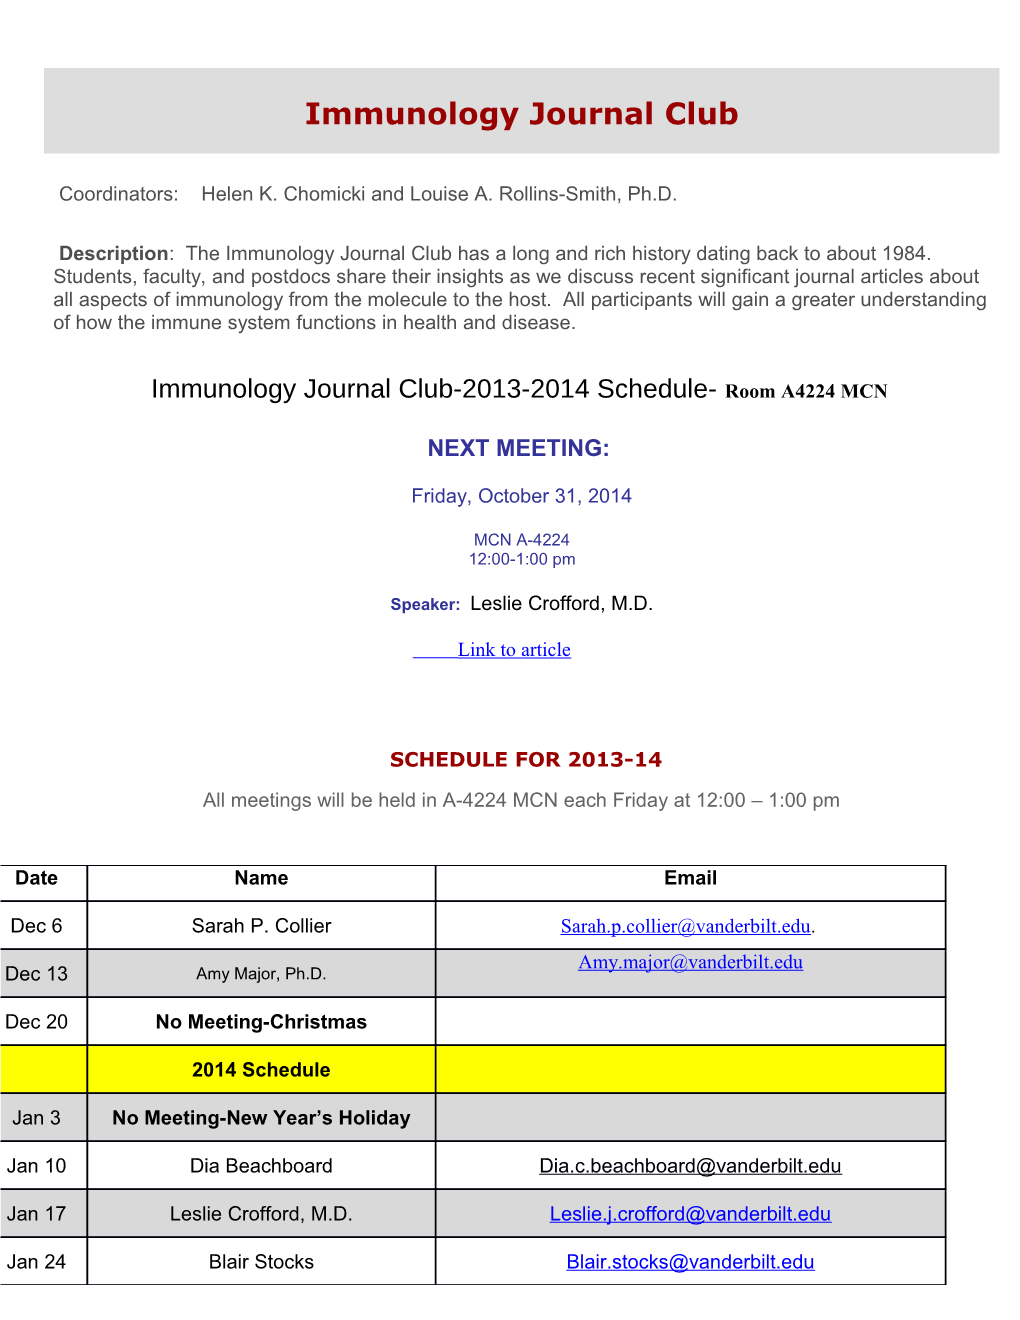 Immunology Journal Club-2013-2014 Schedule- Room A4224 MCN